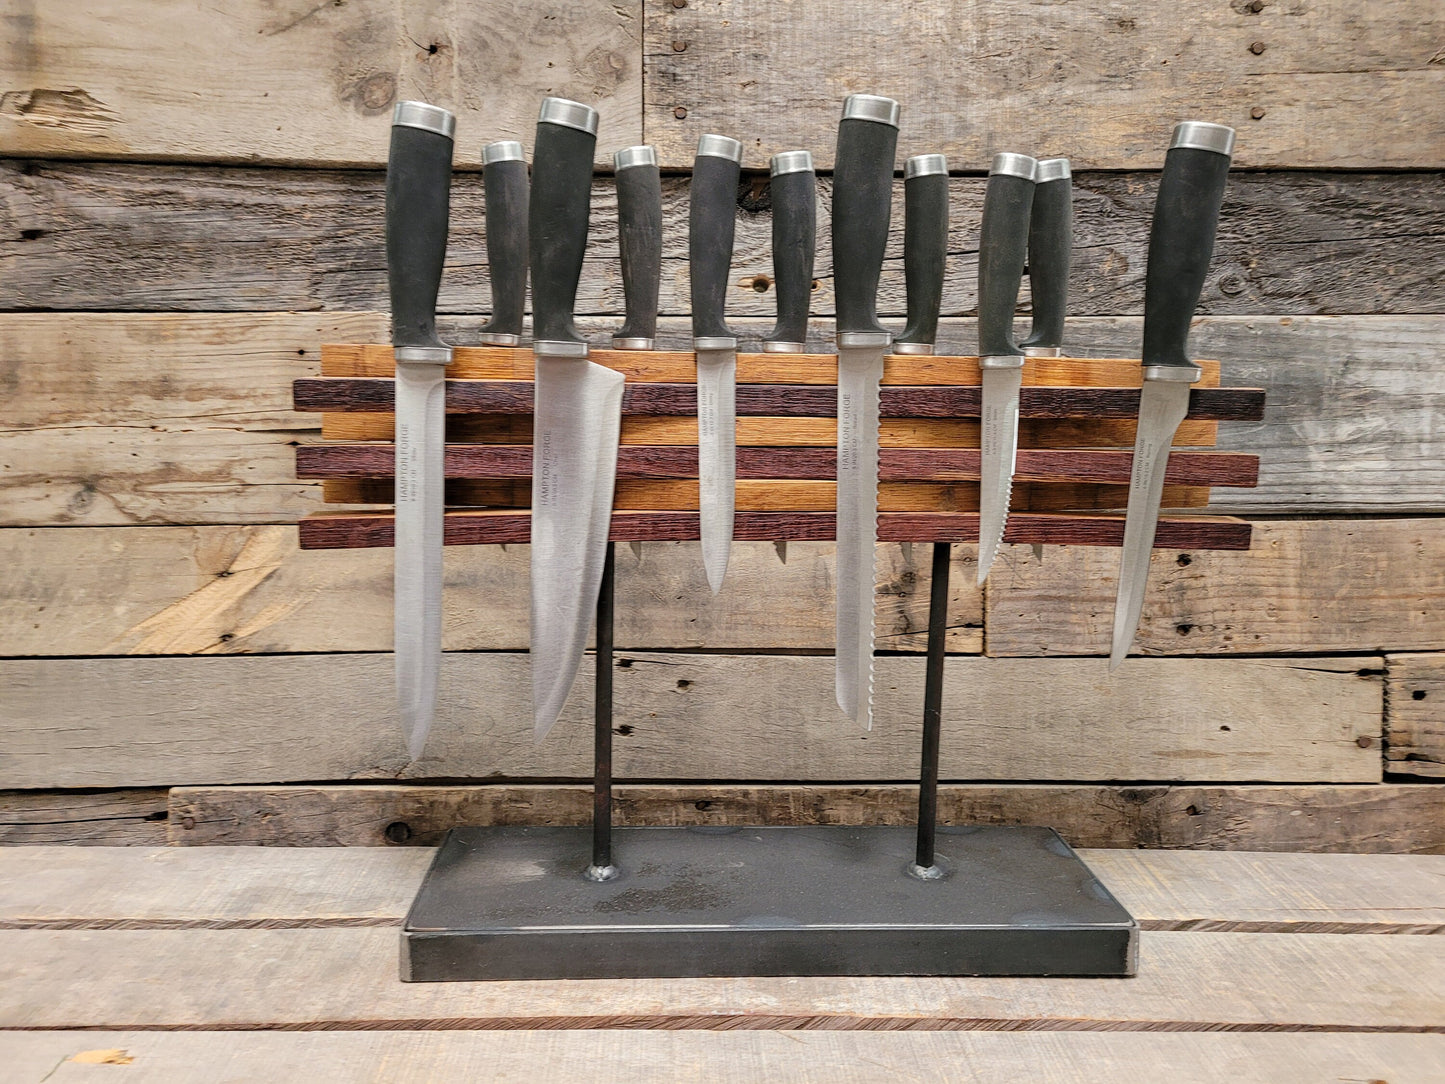 Wine Barrel Magnetic Knife Rack - Osto 2 - Made from retired Napa wine barrels. 100% Recycled!